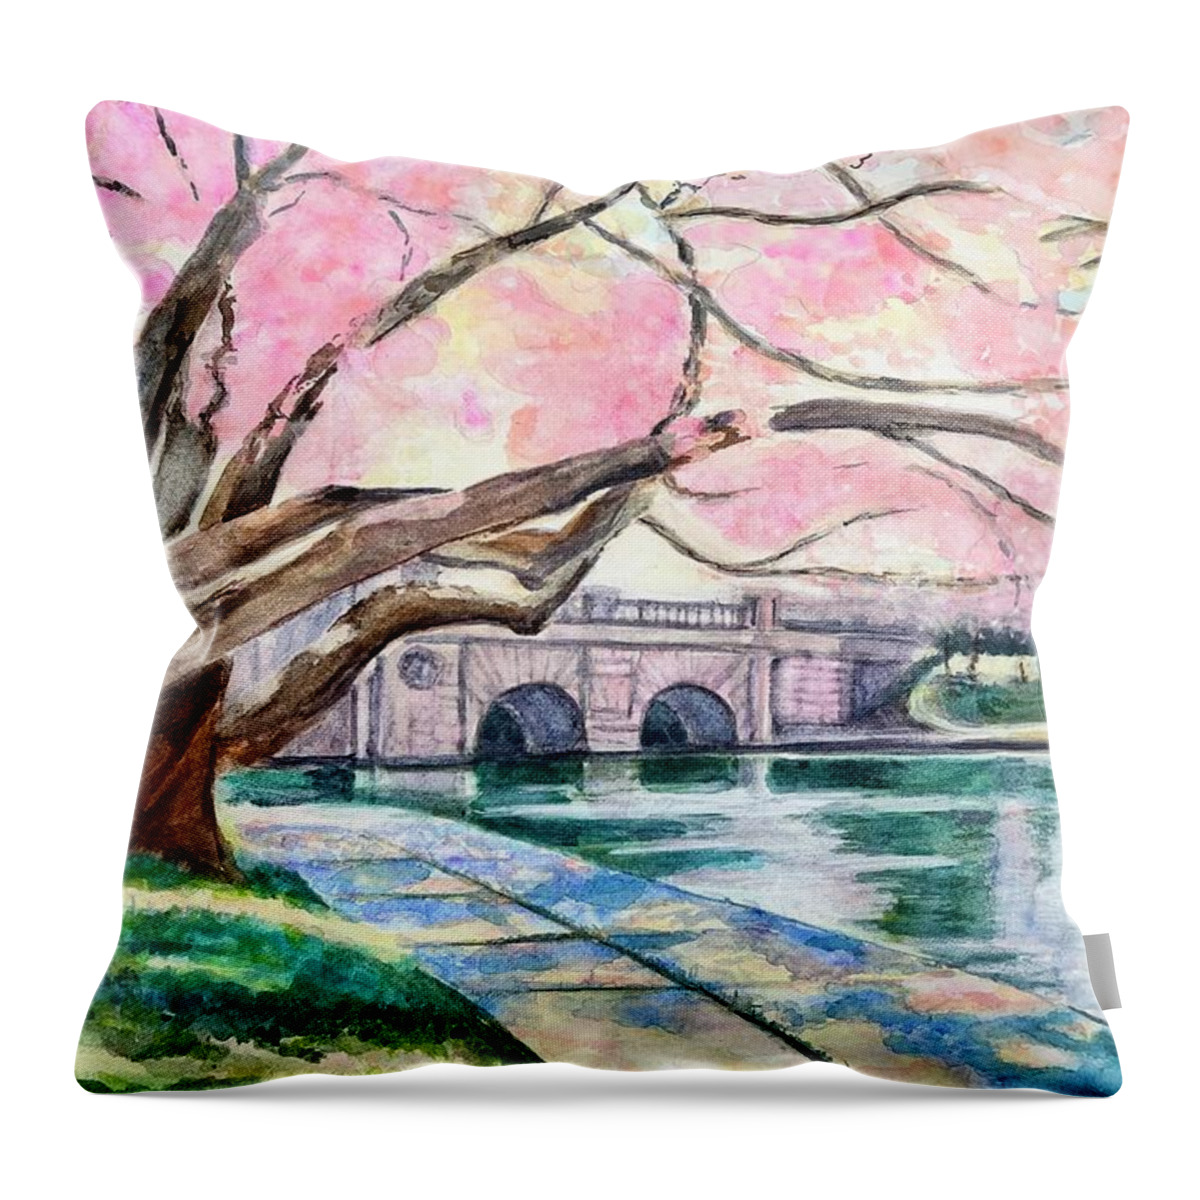 Tidal Basin Inlet Bridge Throw Pillow featuring the painting Washington DC Tidal Basin Inlet Bridge Cherry Blossoms by Patty Kay Hall